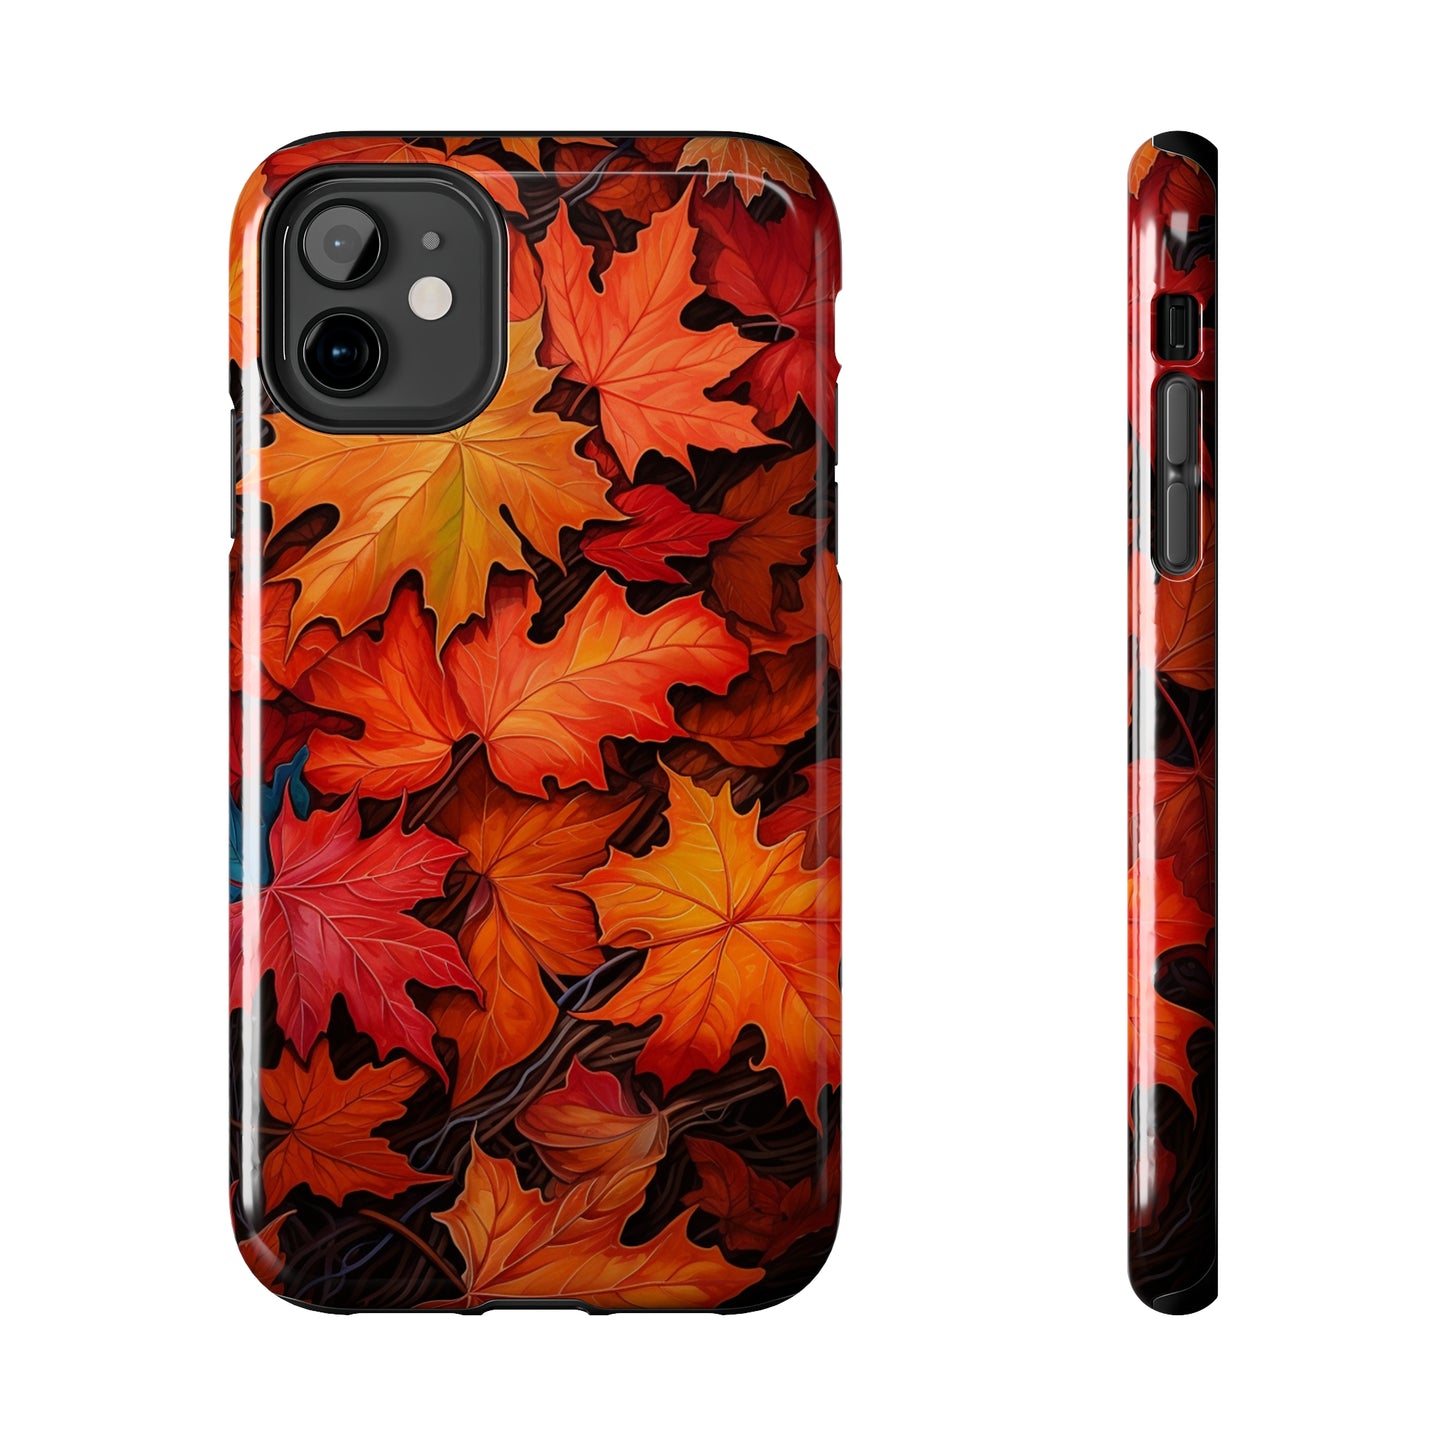 Autumn Aesthetic Fall Leaves | iPhone 14 13 12 11 Pro Max case iPhone XR XS Max Case iPhone X Case iPhone 7 Plus iPhone 8 Plus case iPhone 6 case